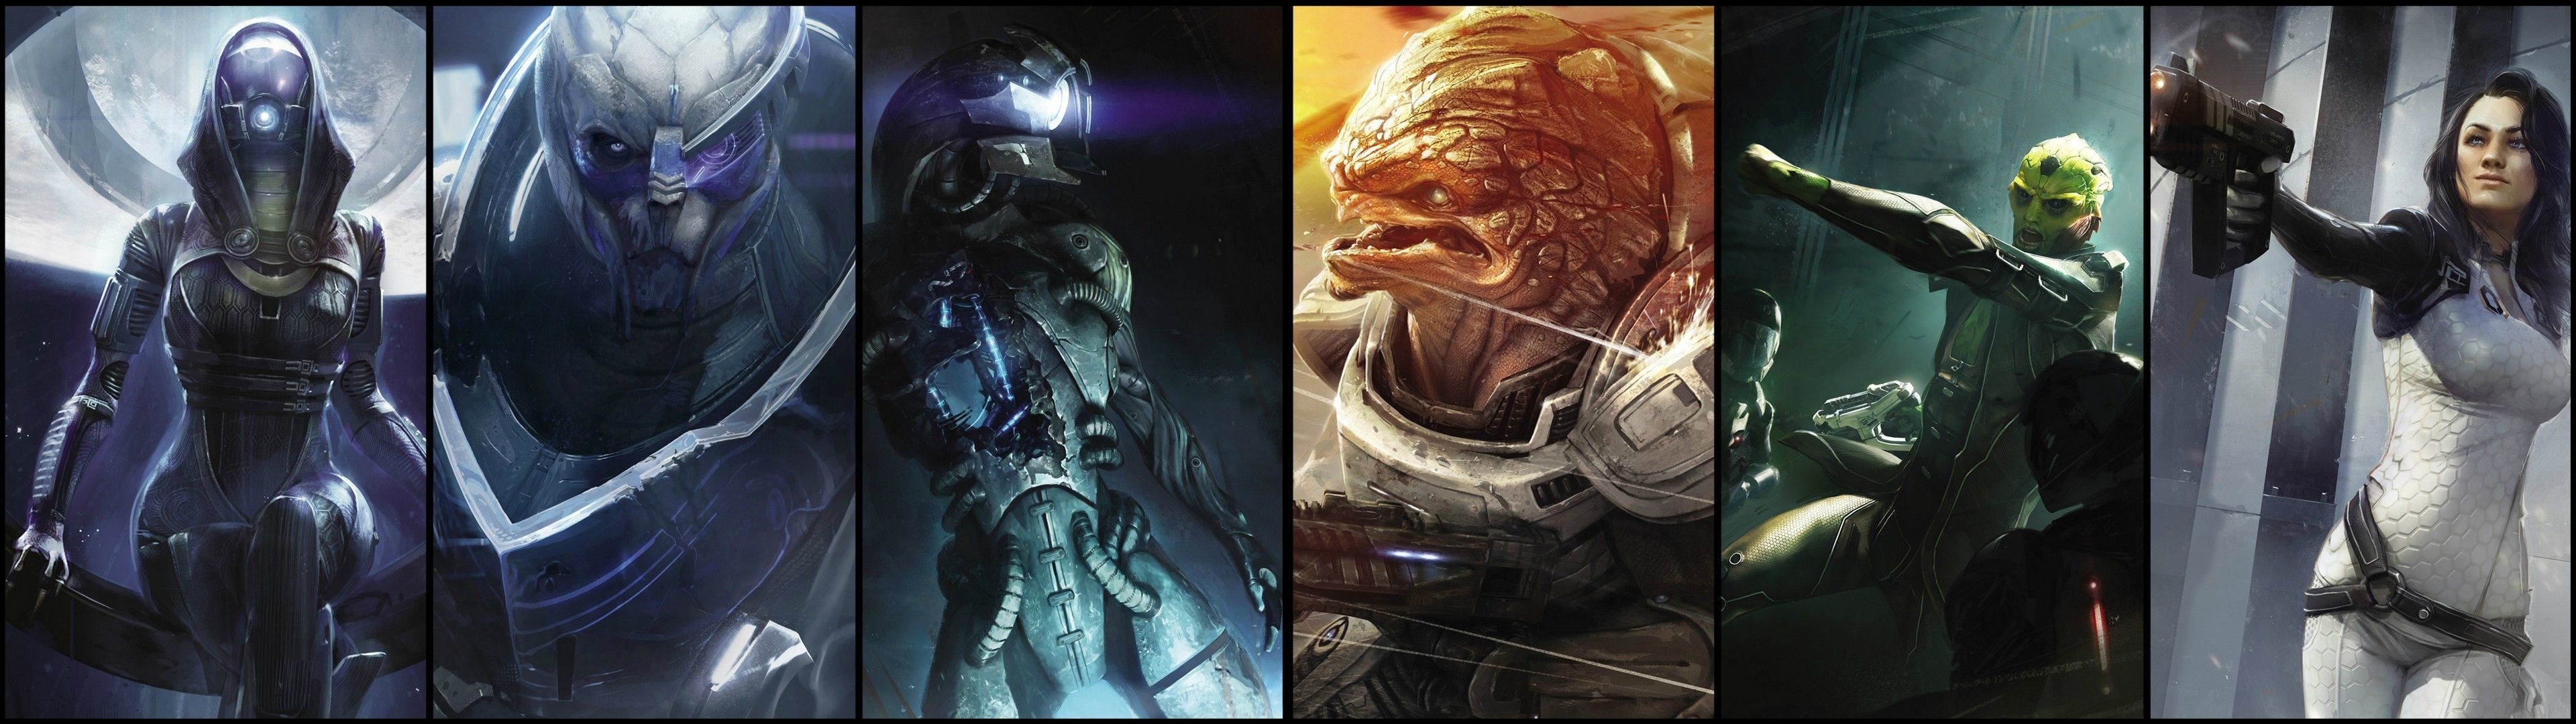 3840x1080 My favorite (and current!) Dual-Monitor Wallpaper, featuring six Mass  Effect characters.